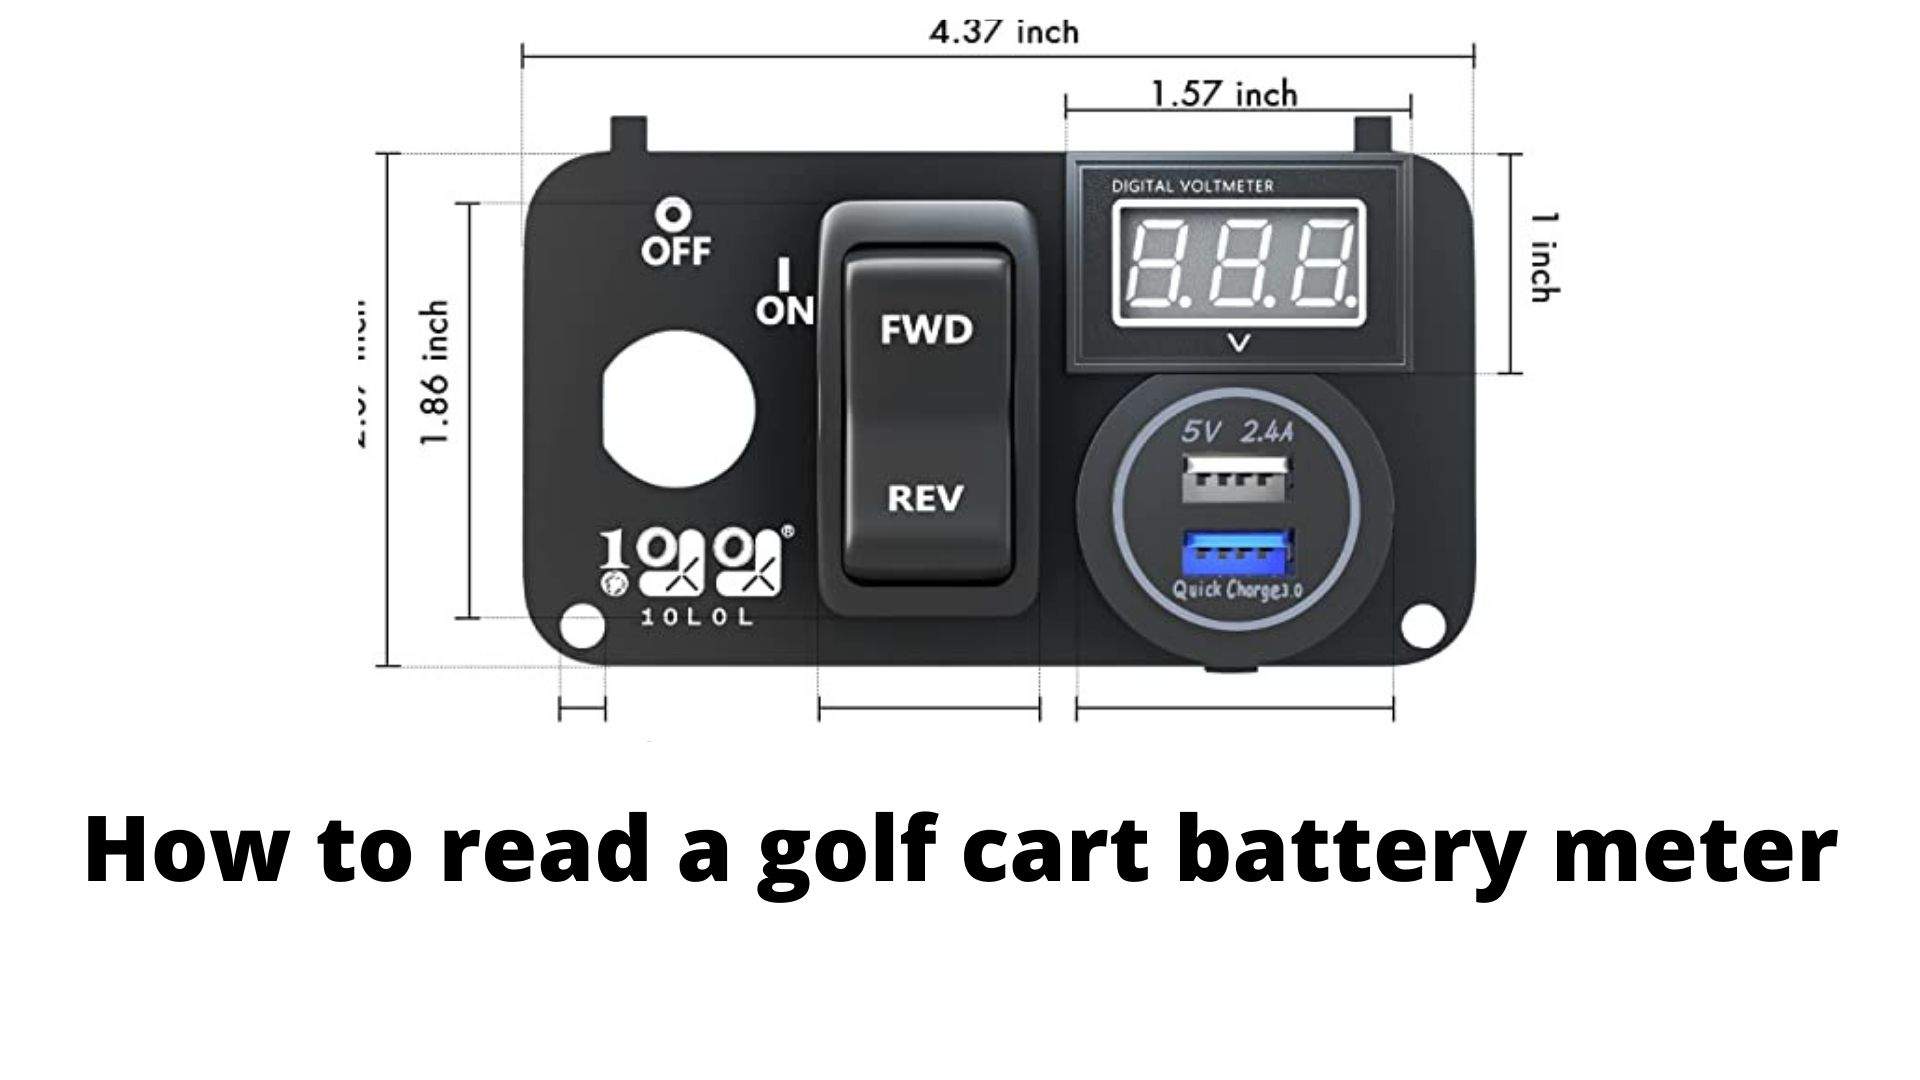 How To Read A Golf Cart Battery Meter